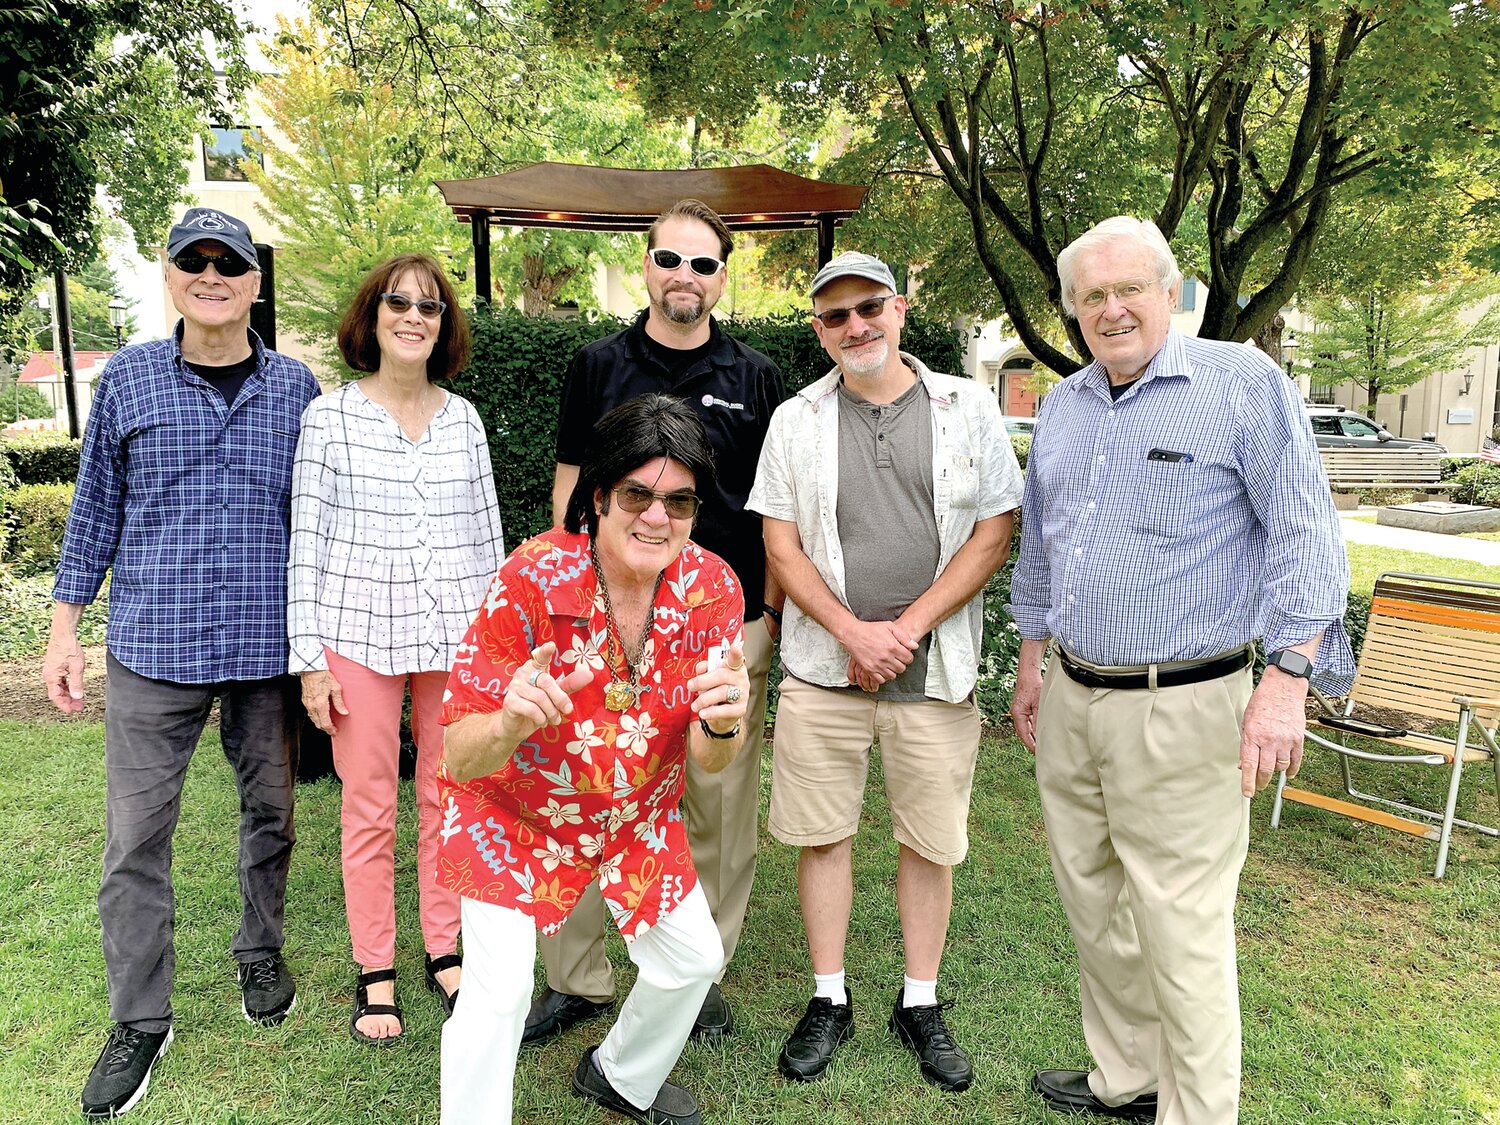 Art D’Angelo, Denise Gealer, Brad Sanders, Tom Brunt and Erik Fleischer, shown here with special guest John Ekey (aka “Elvis Pretzel”), are members of the Central Bucks Chamber of Commerce’s Bucks Fever Brown Bag-it with the Arts committee.